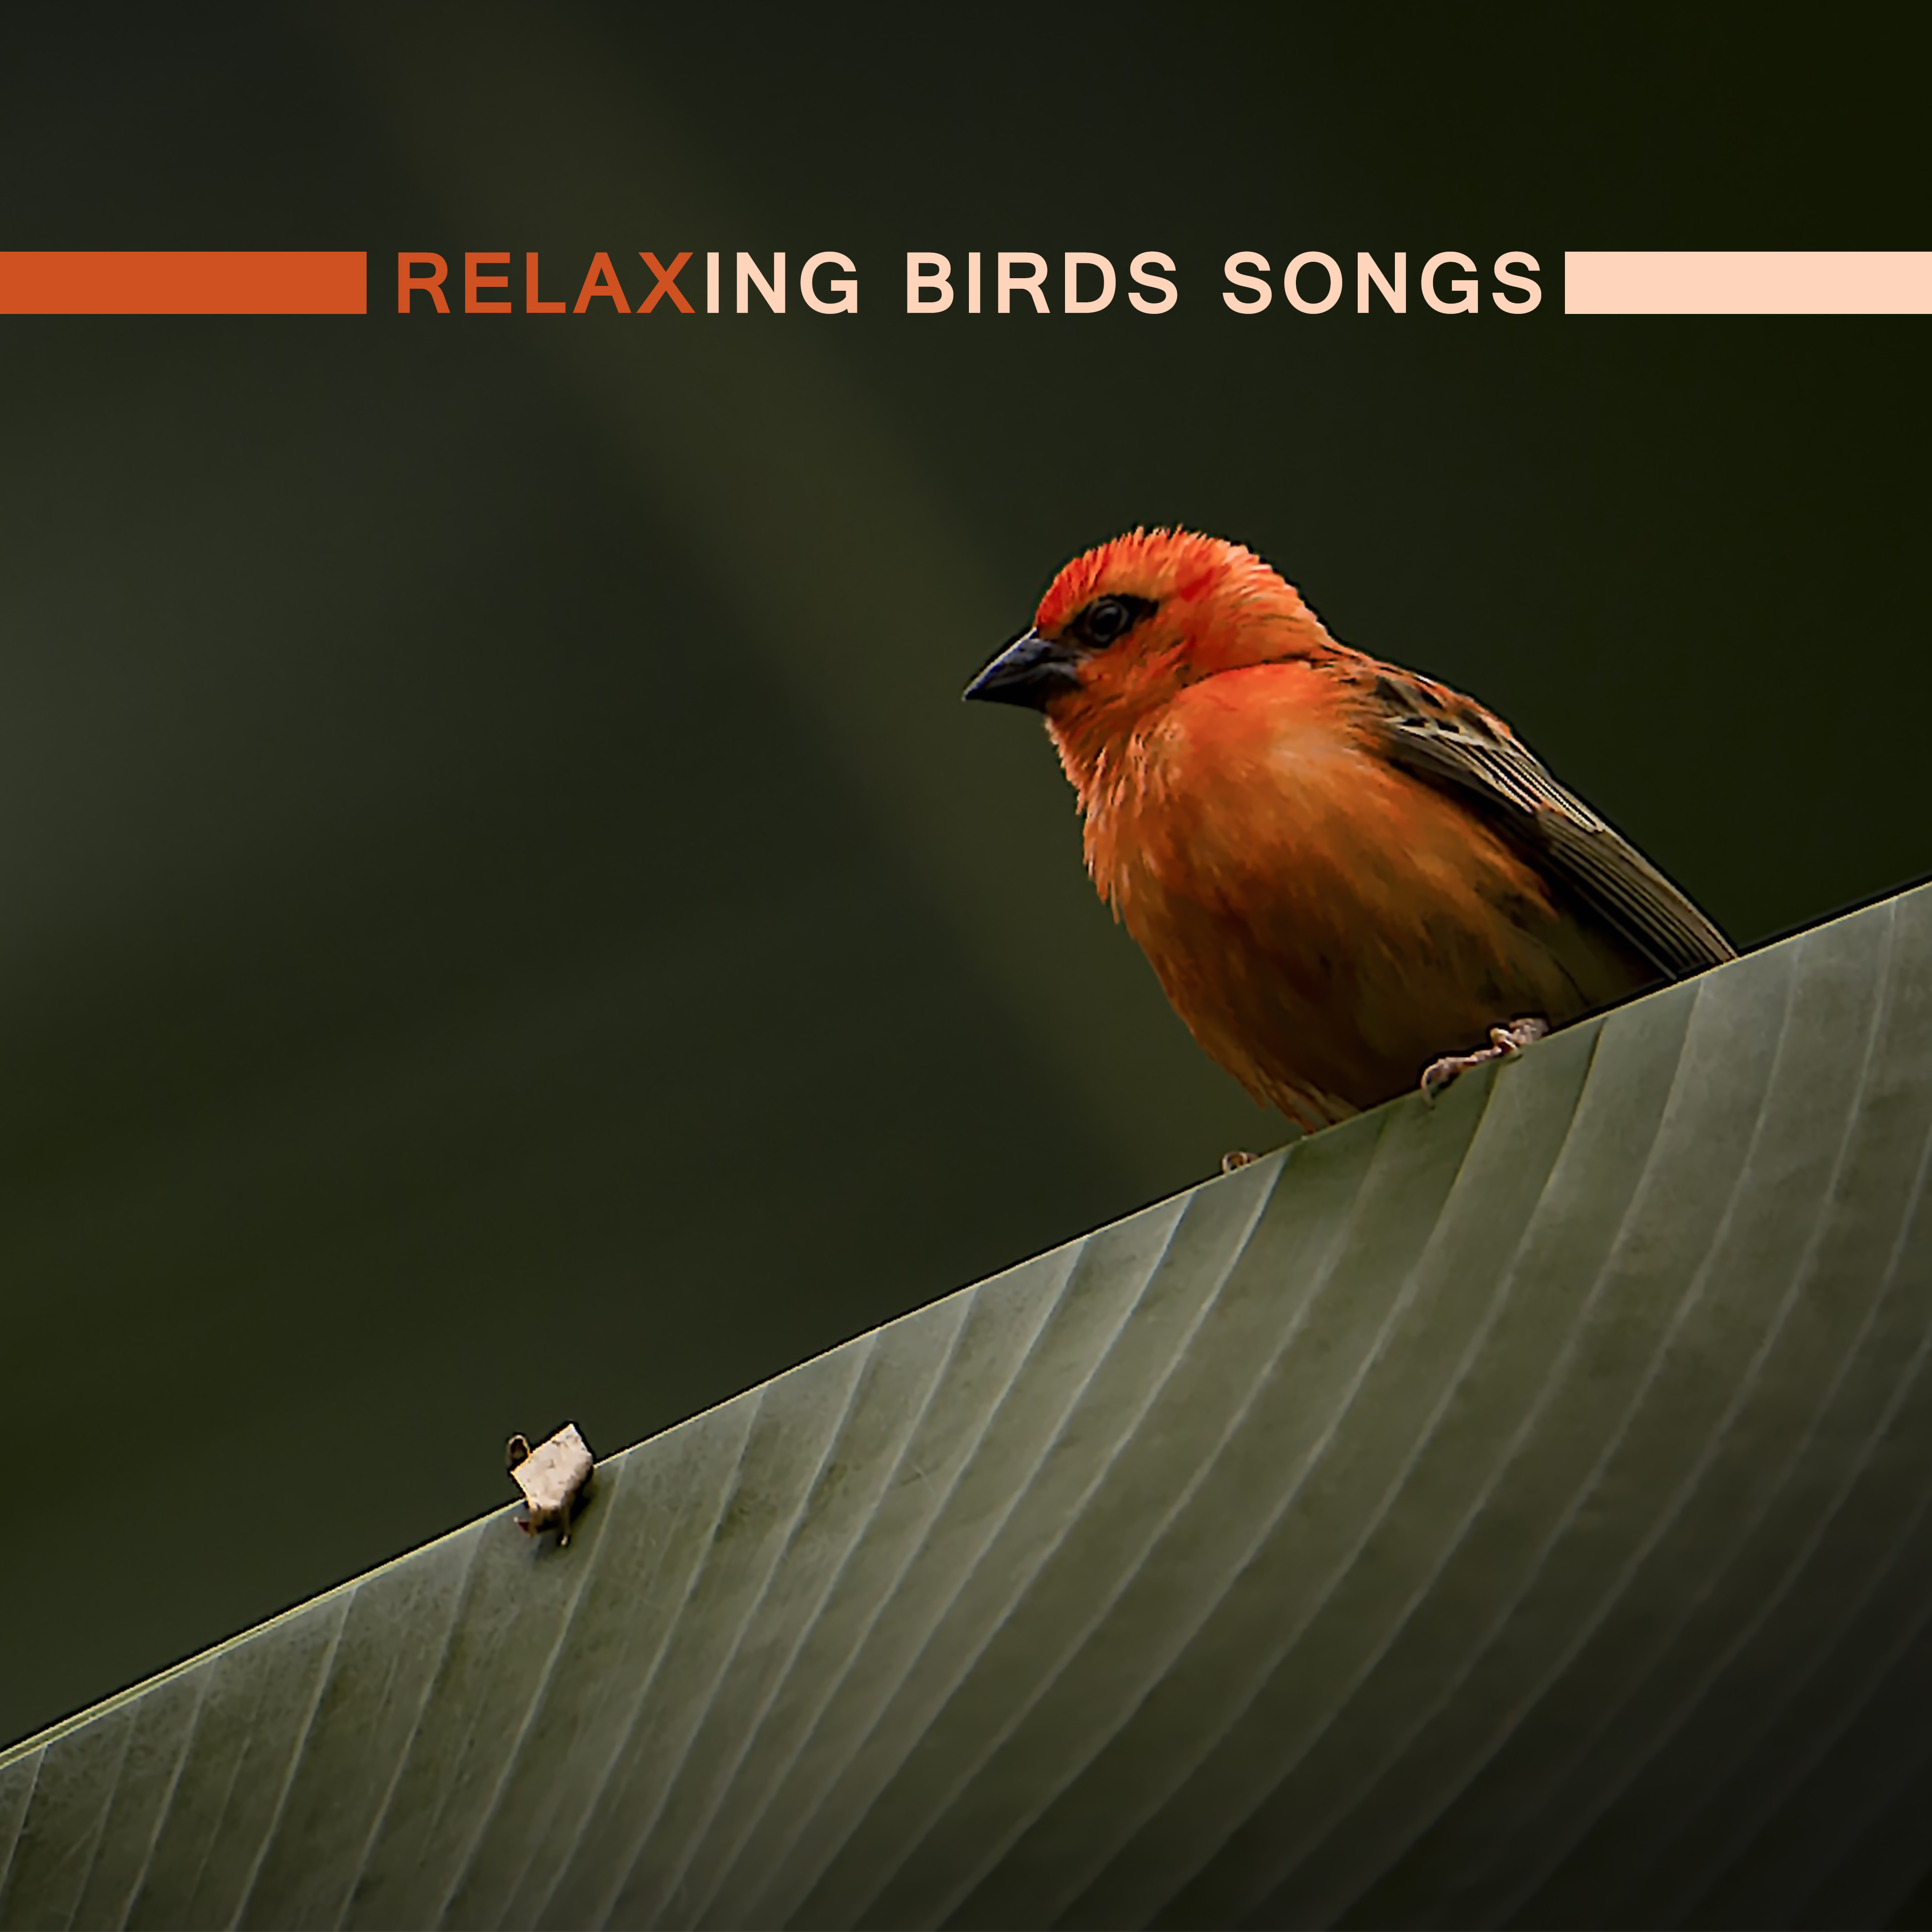 Relaxing Birds Songs  New Age, Full of Calming  Sounds, Rest, Spa, Healing Relaxing Music